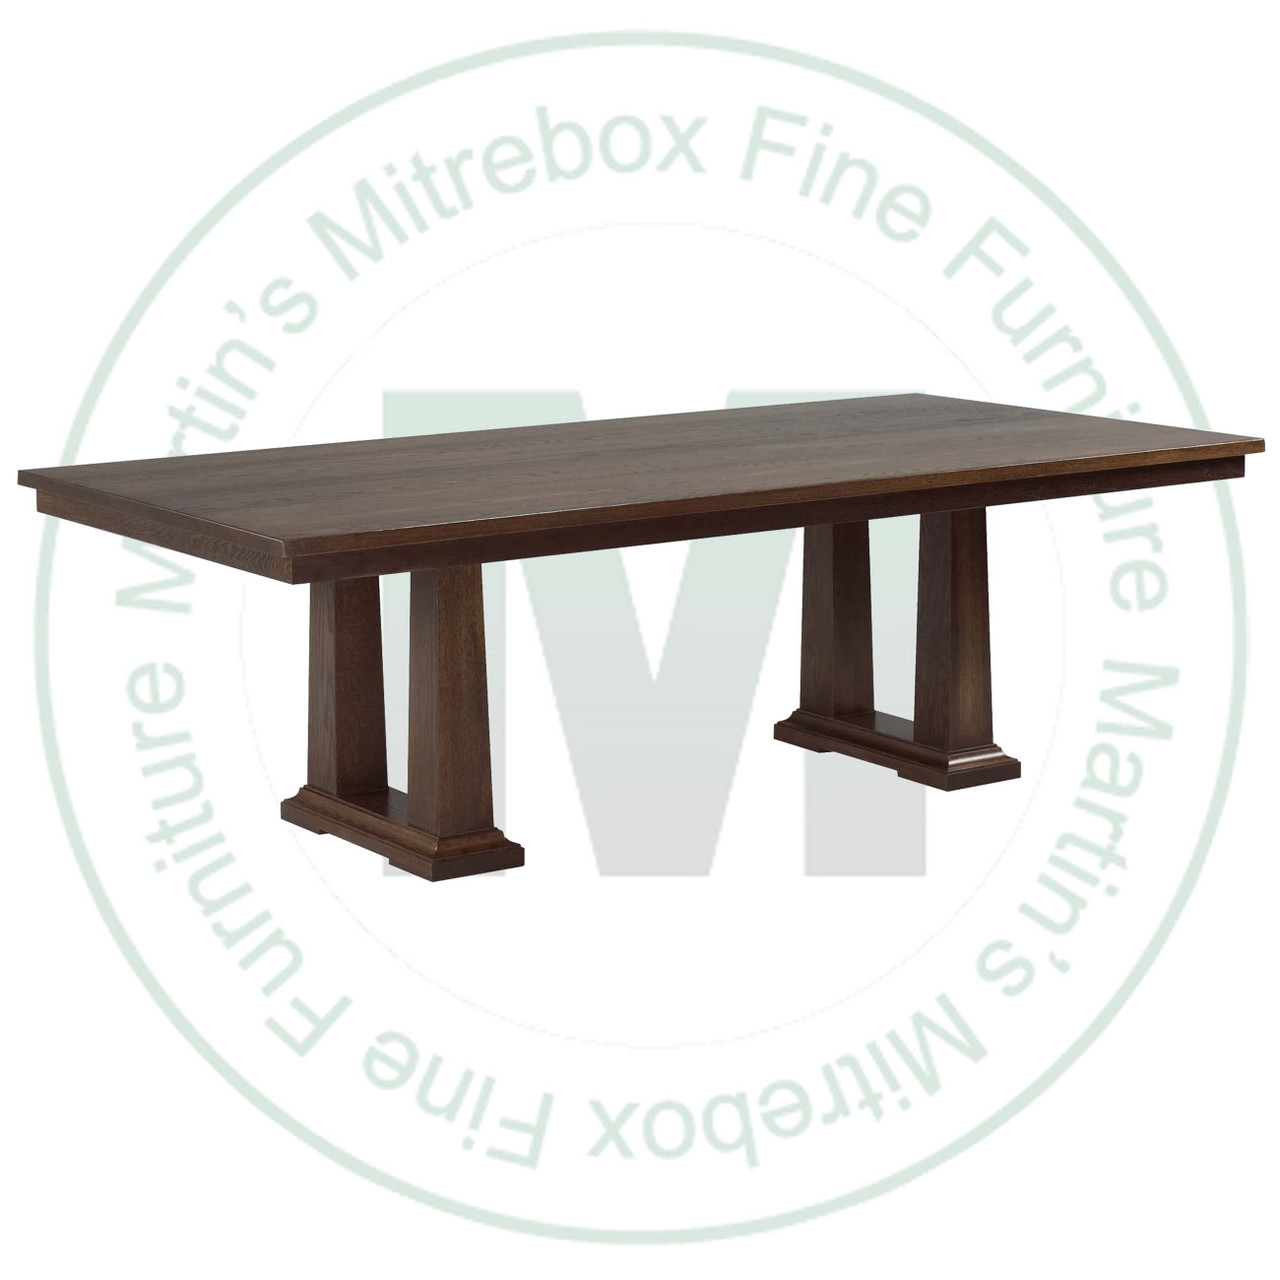 Maple Acropolis Extension Double Pedestal Table 48''D x 96''W x 30''H With 2 - 12'' Leaves Table Has 1.25'' Thick Top